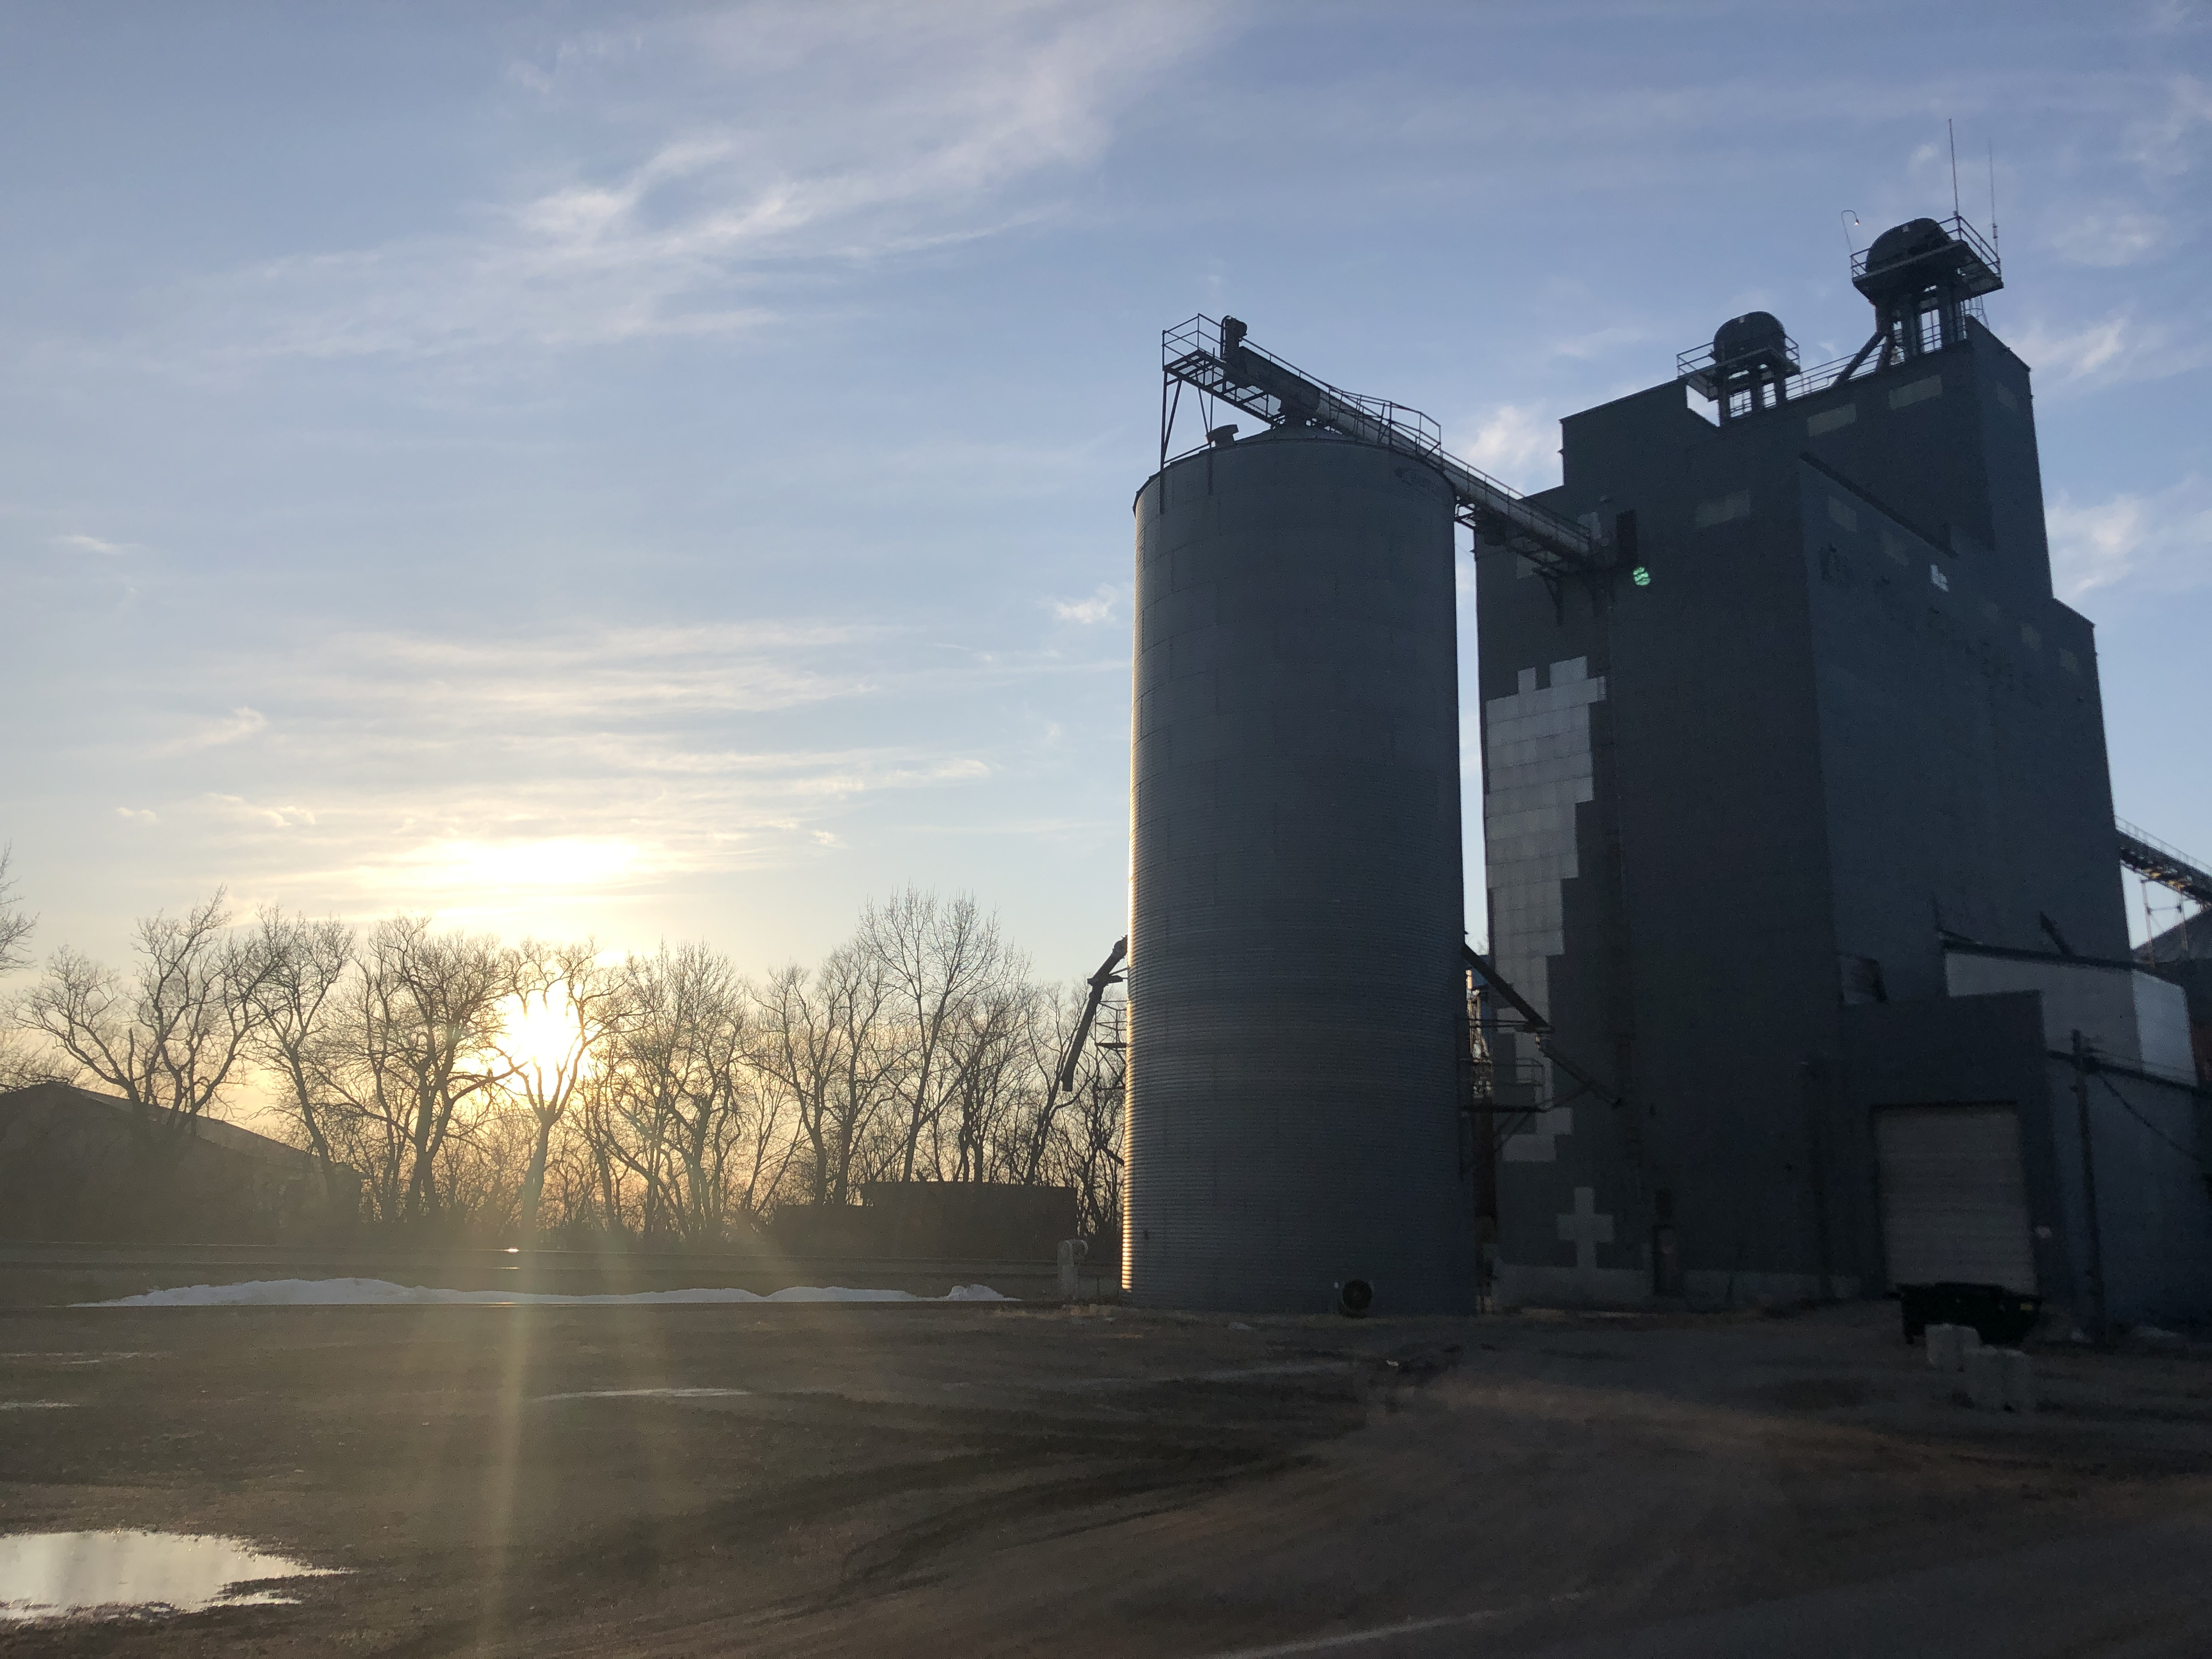 Morning Ag News, July 20, 2021: Propane supplies could be tight at harvest